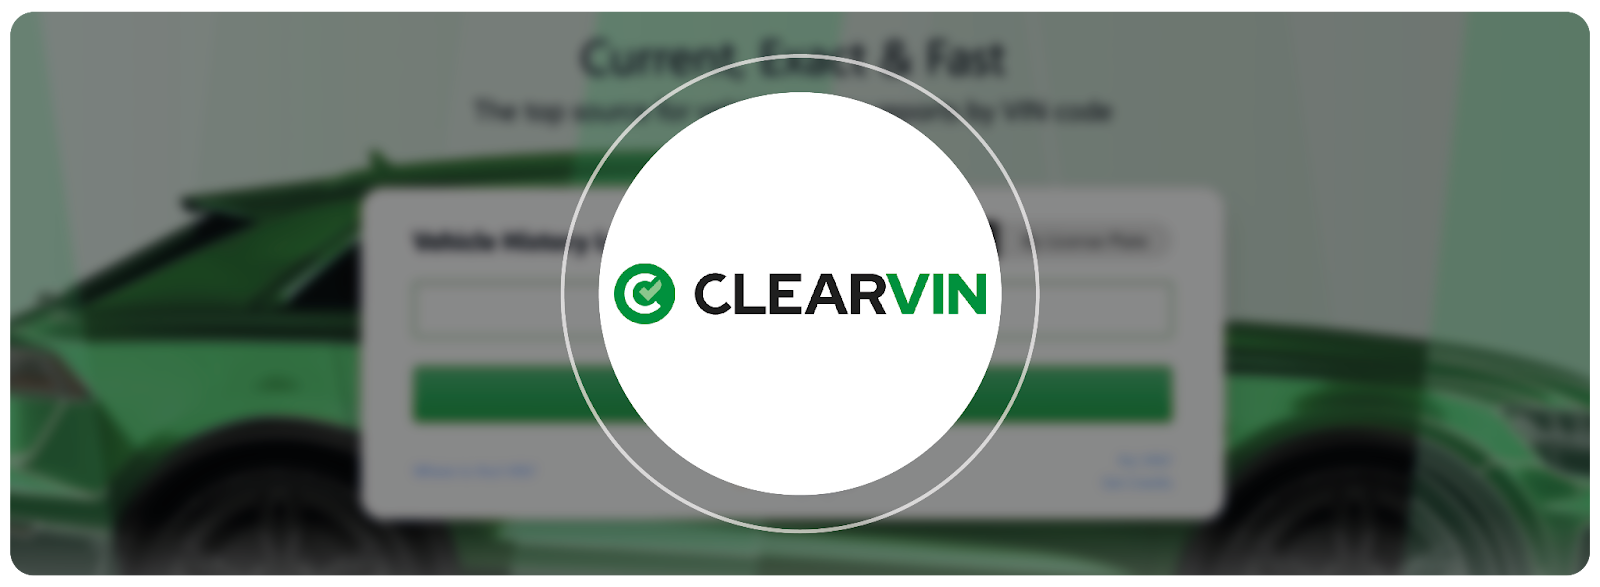 Clearvin